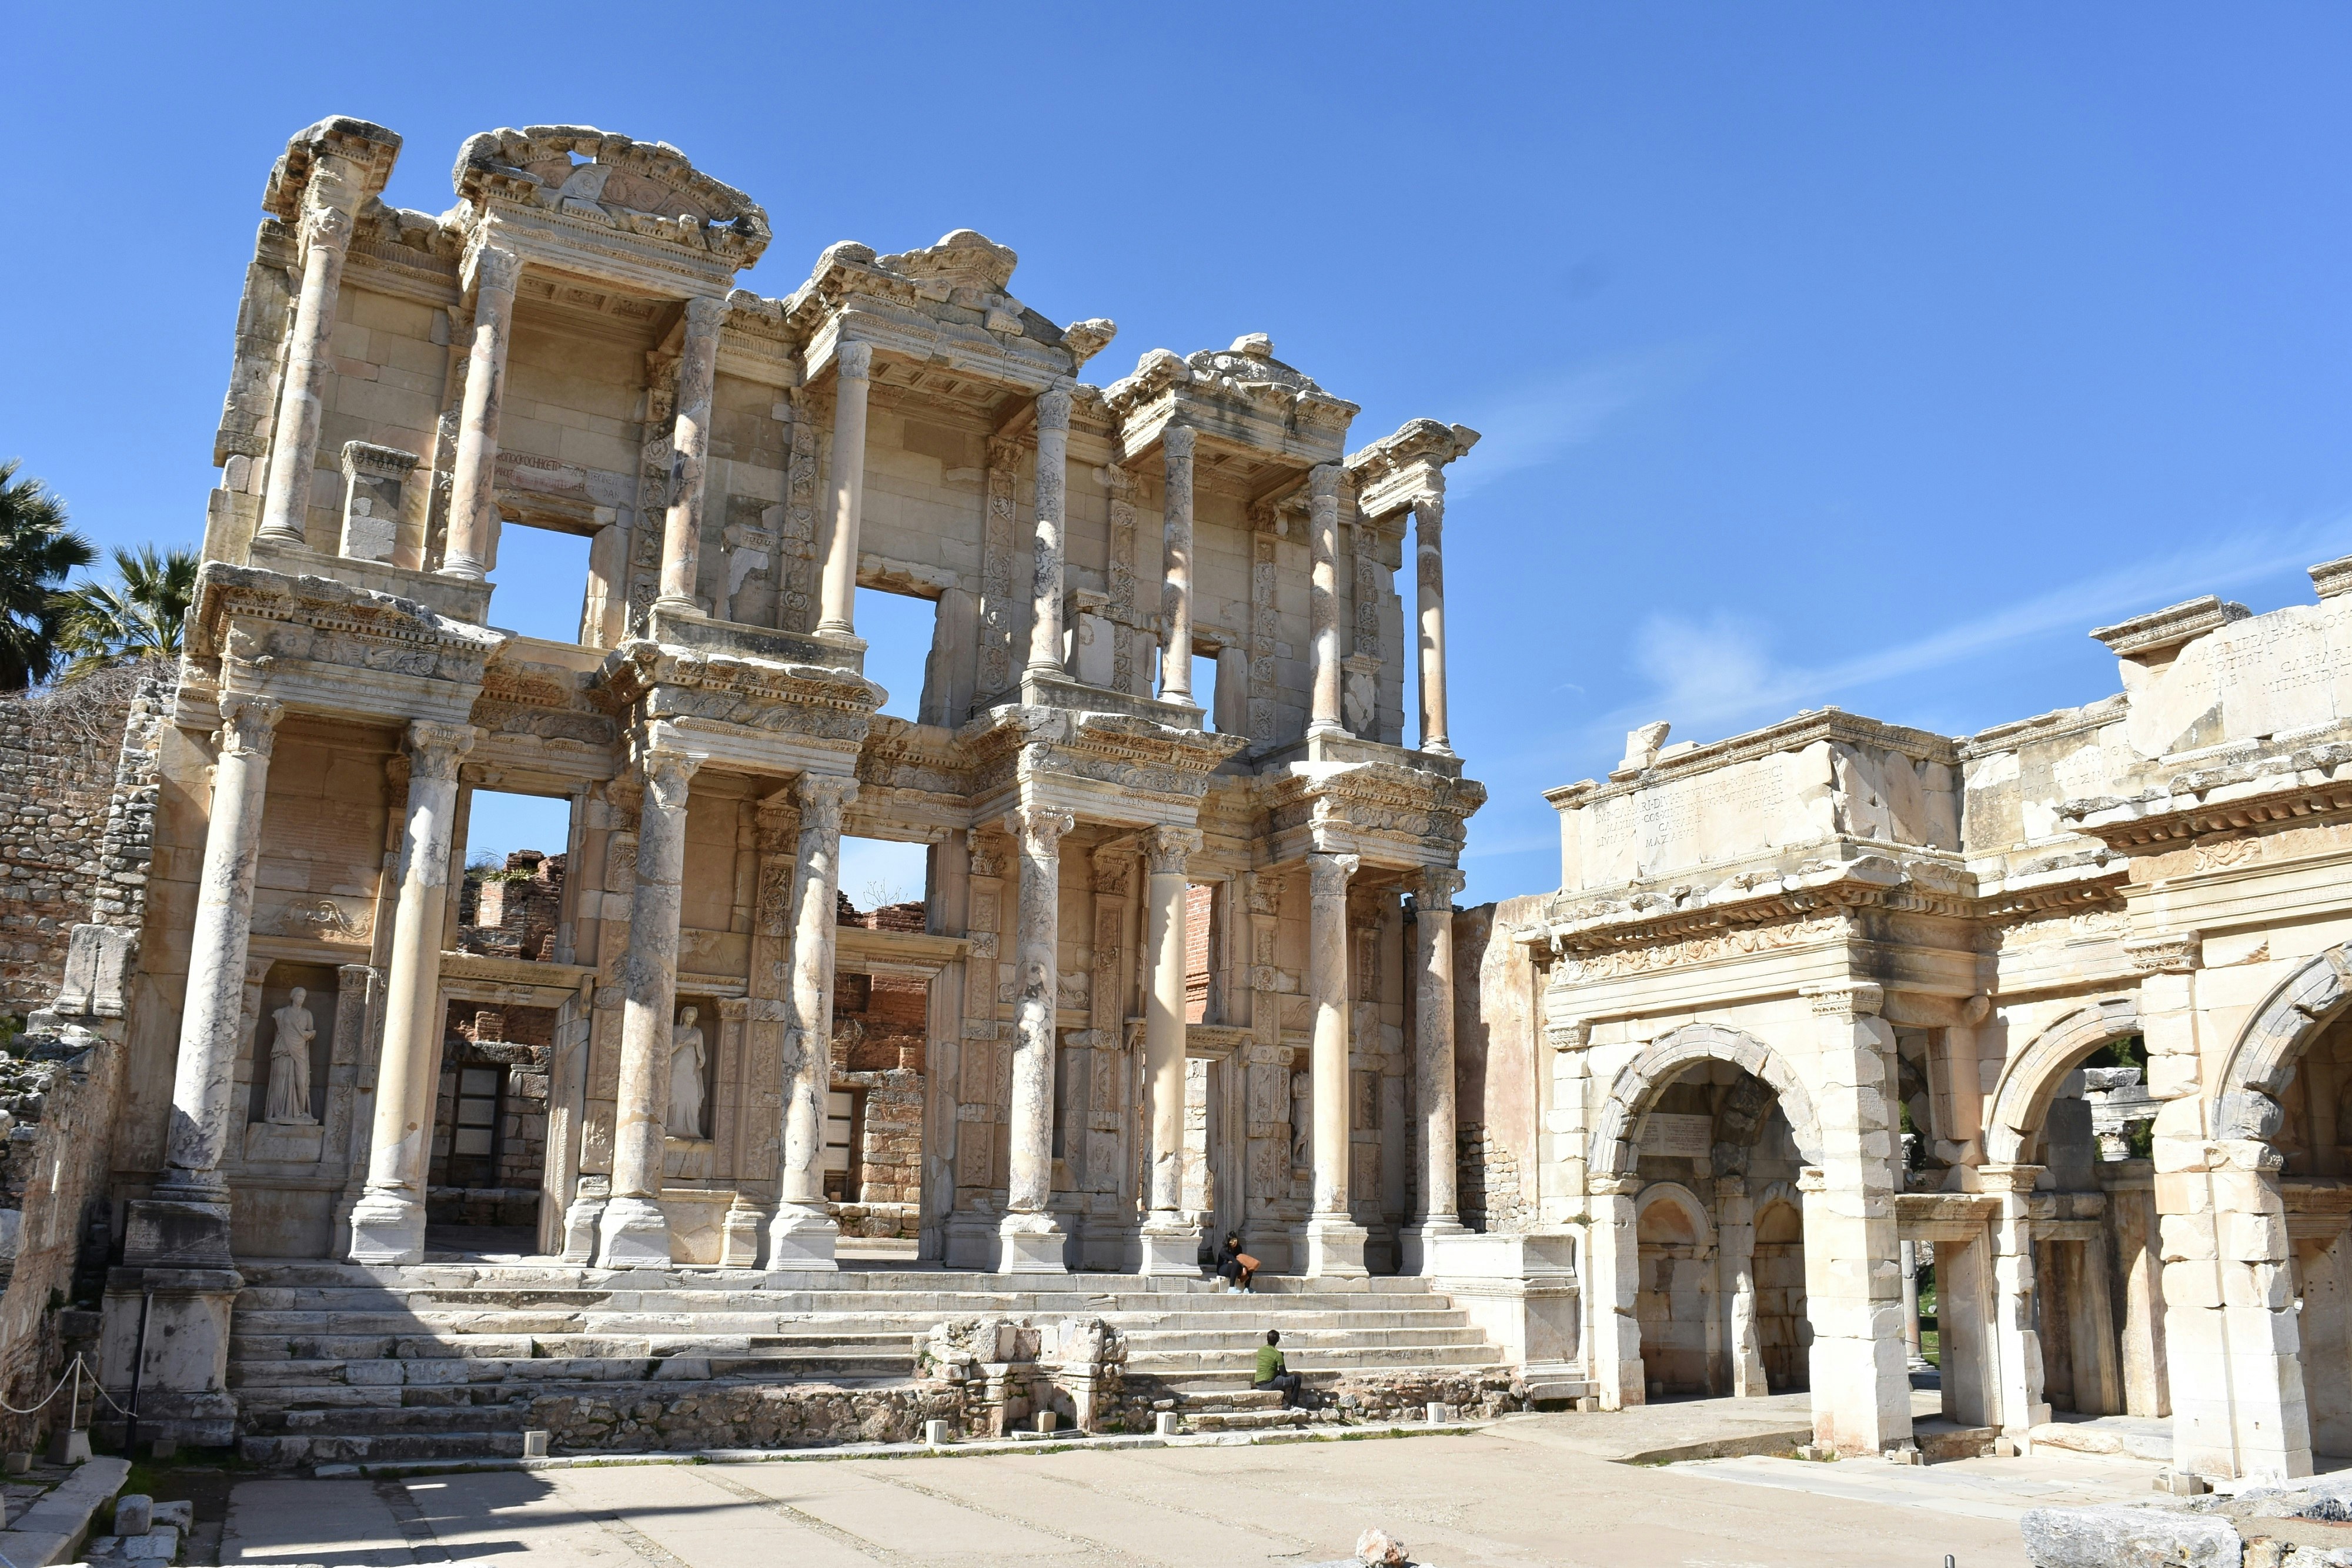 Ruins outdoors in Ephesus, Turkey, on a sunny day. Clear skies are visible in the background. 